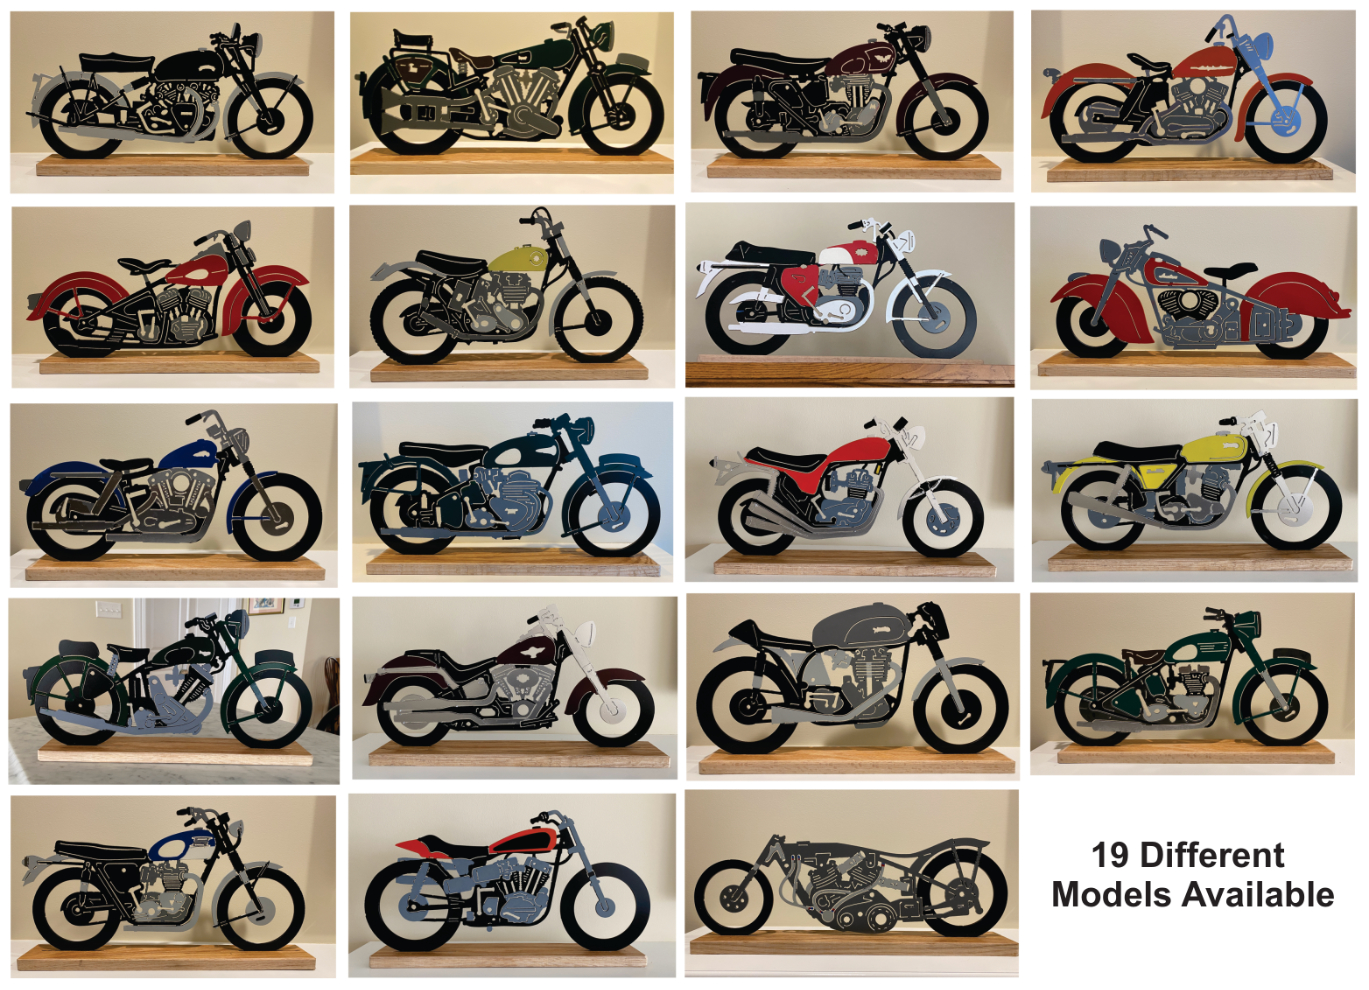 This shows a collage of 19 vintage British and American bikes from the 1900s, painted in their original colors.